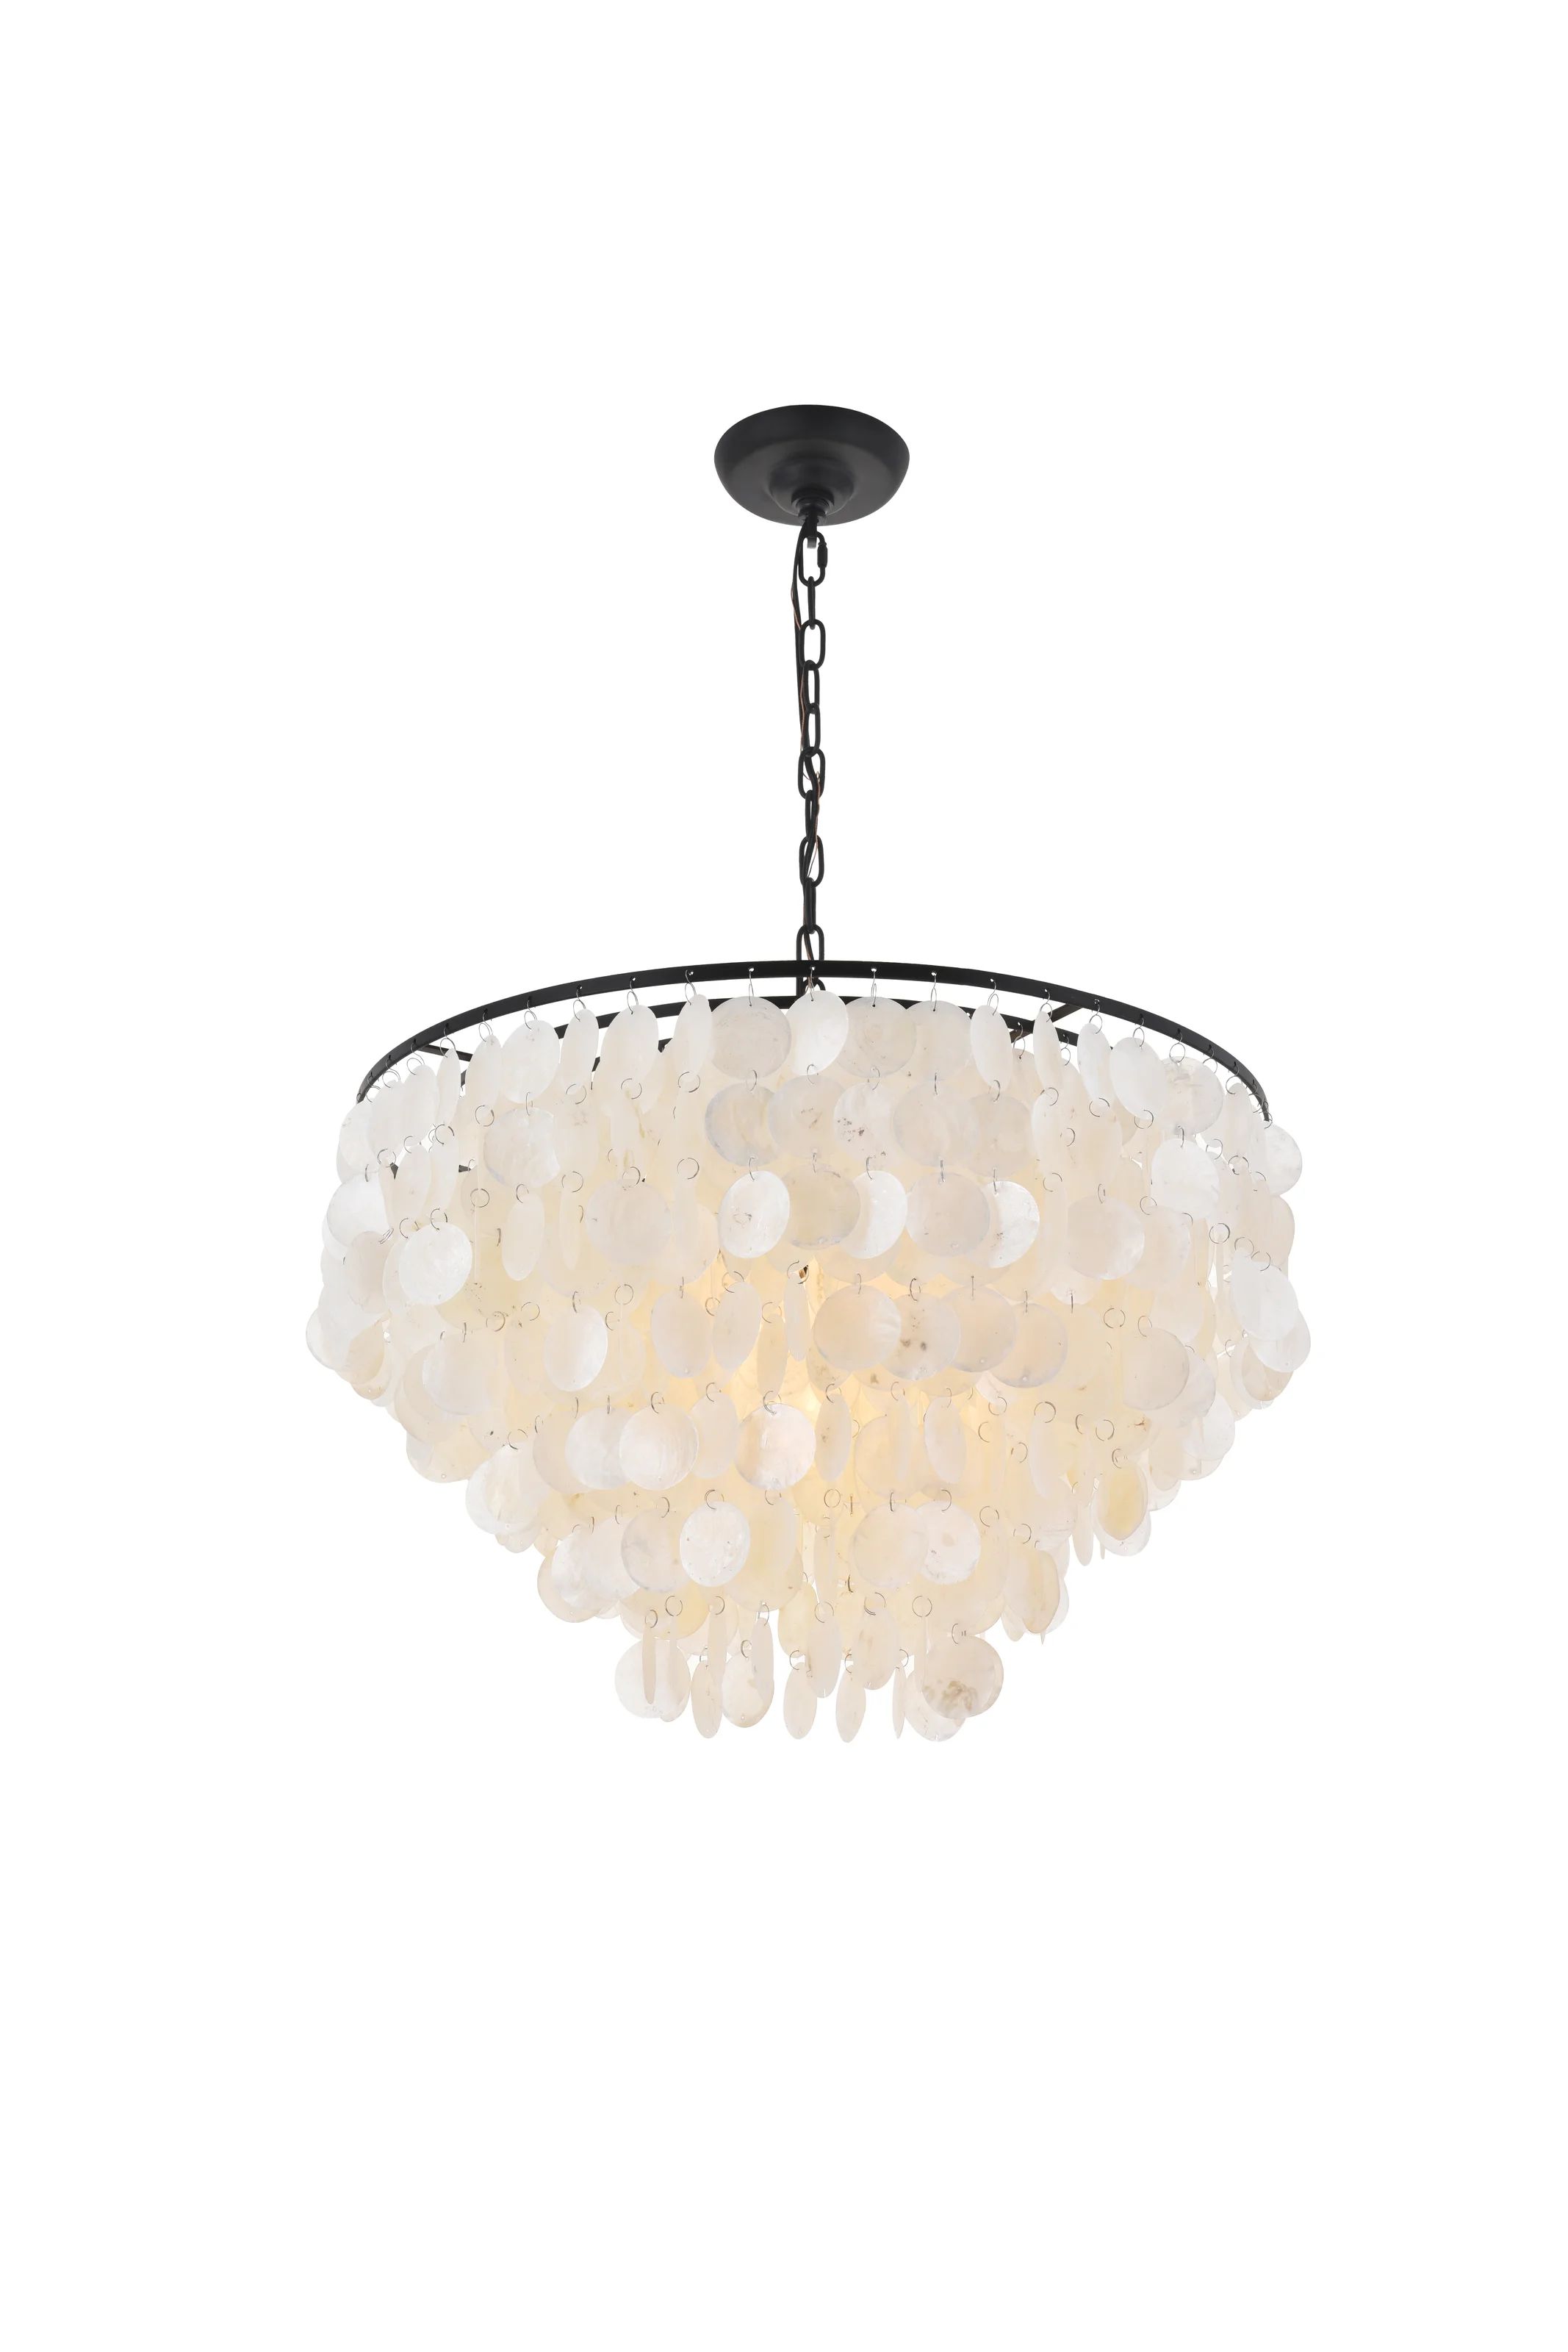 Willoughby 6 - Light Unique / Statement Tiered Pendant | Wayfair Professional